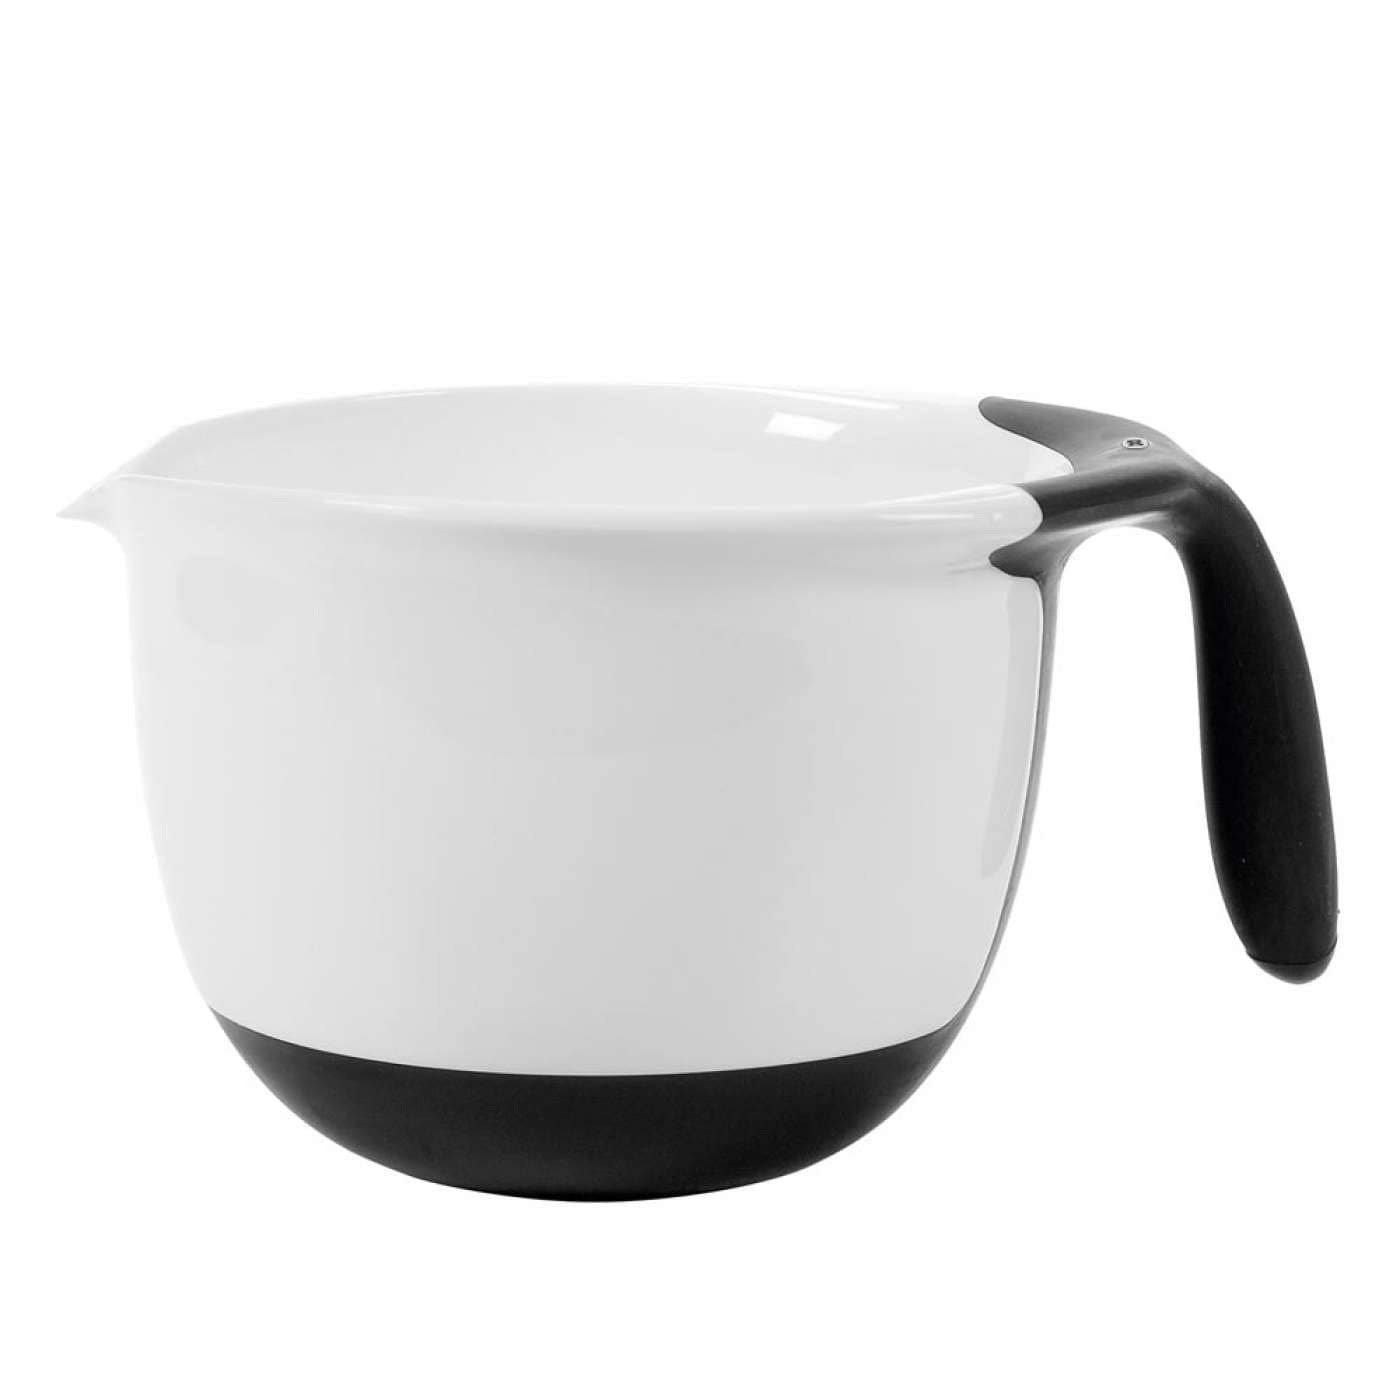 OXO Good Grips Mixing Bowl Set - White/Colored Grip, 3 Pc